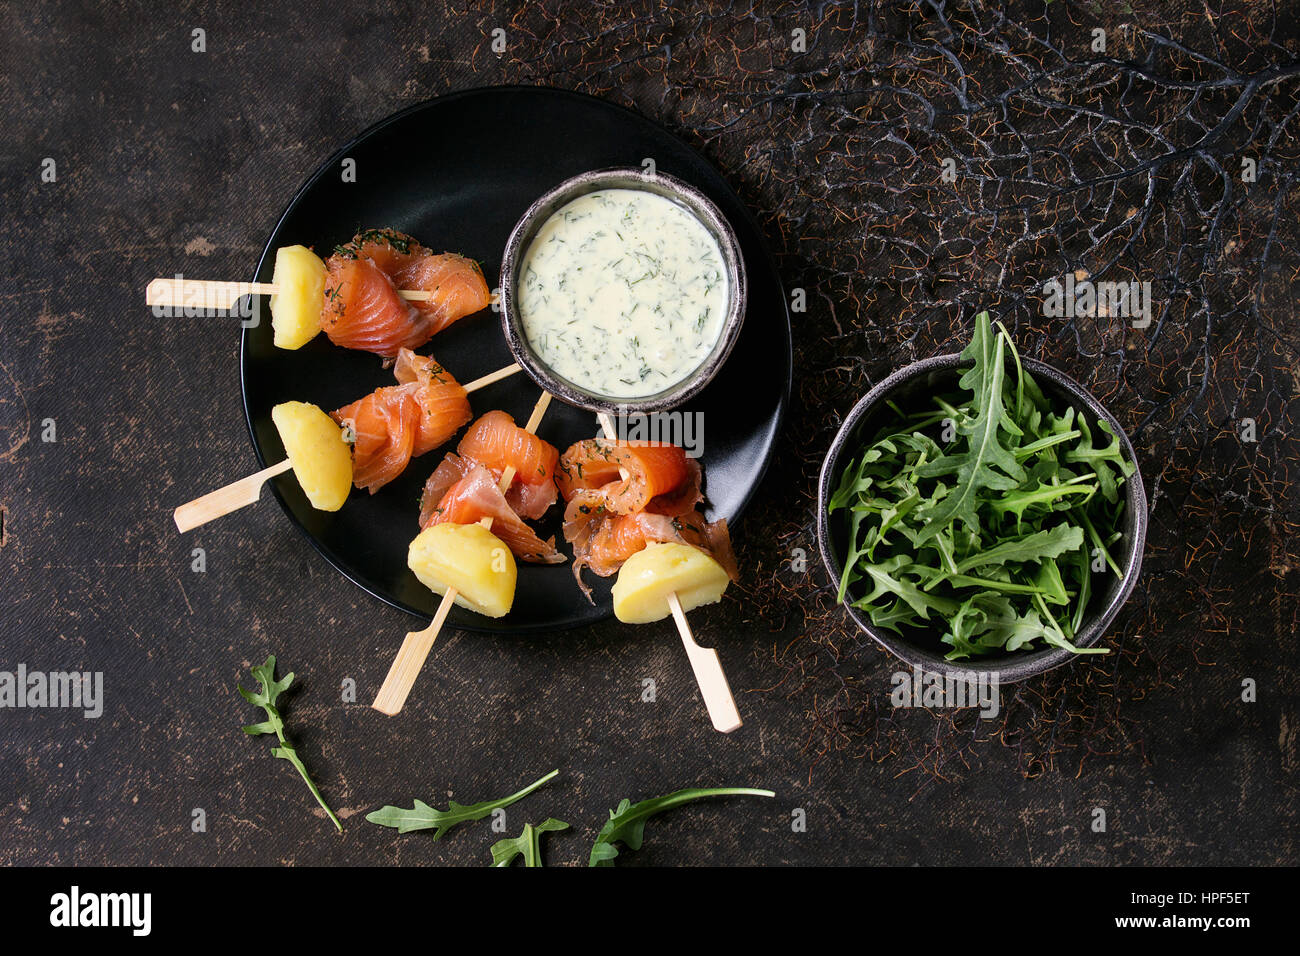 Delicious Appetizer with smoked salted salmon and boiled potatoes on skewers served with creamy dill sauce and arugula on black plate over dark backgr Stock Photo